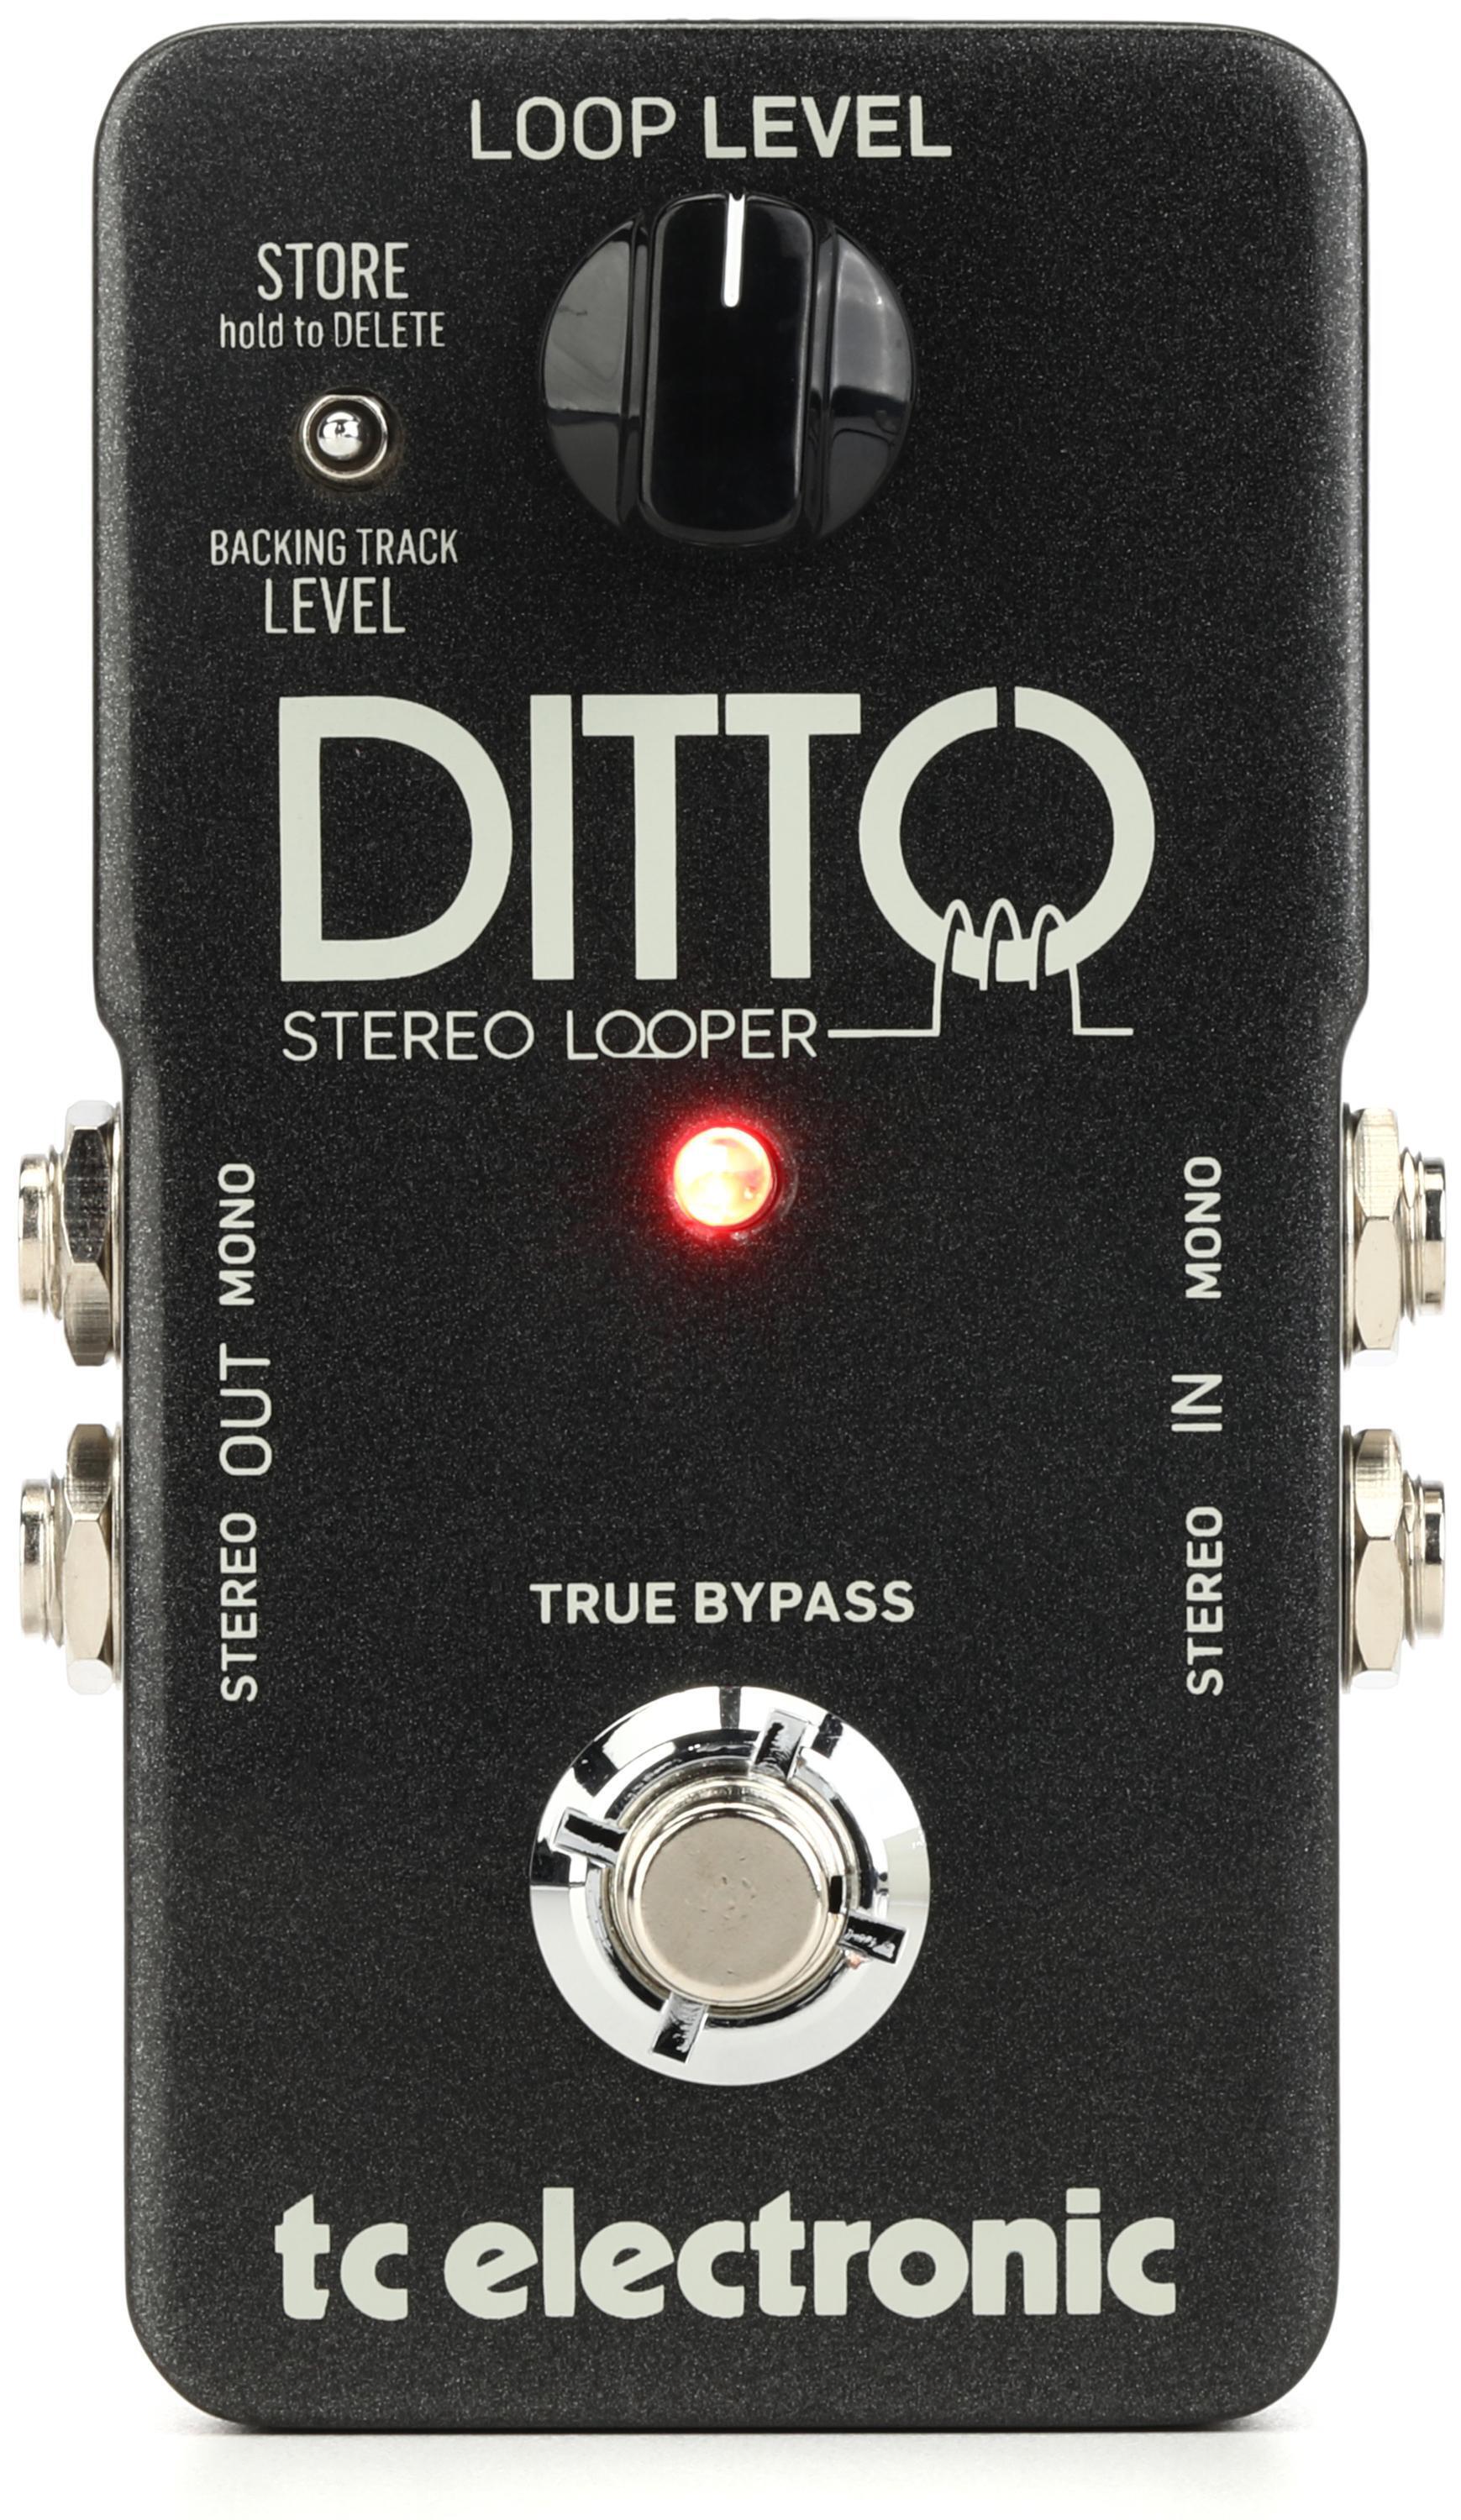 Bundled Item: TC Electronic Ditto Stereo Looper Pedal